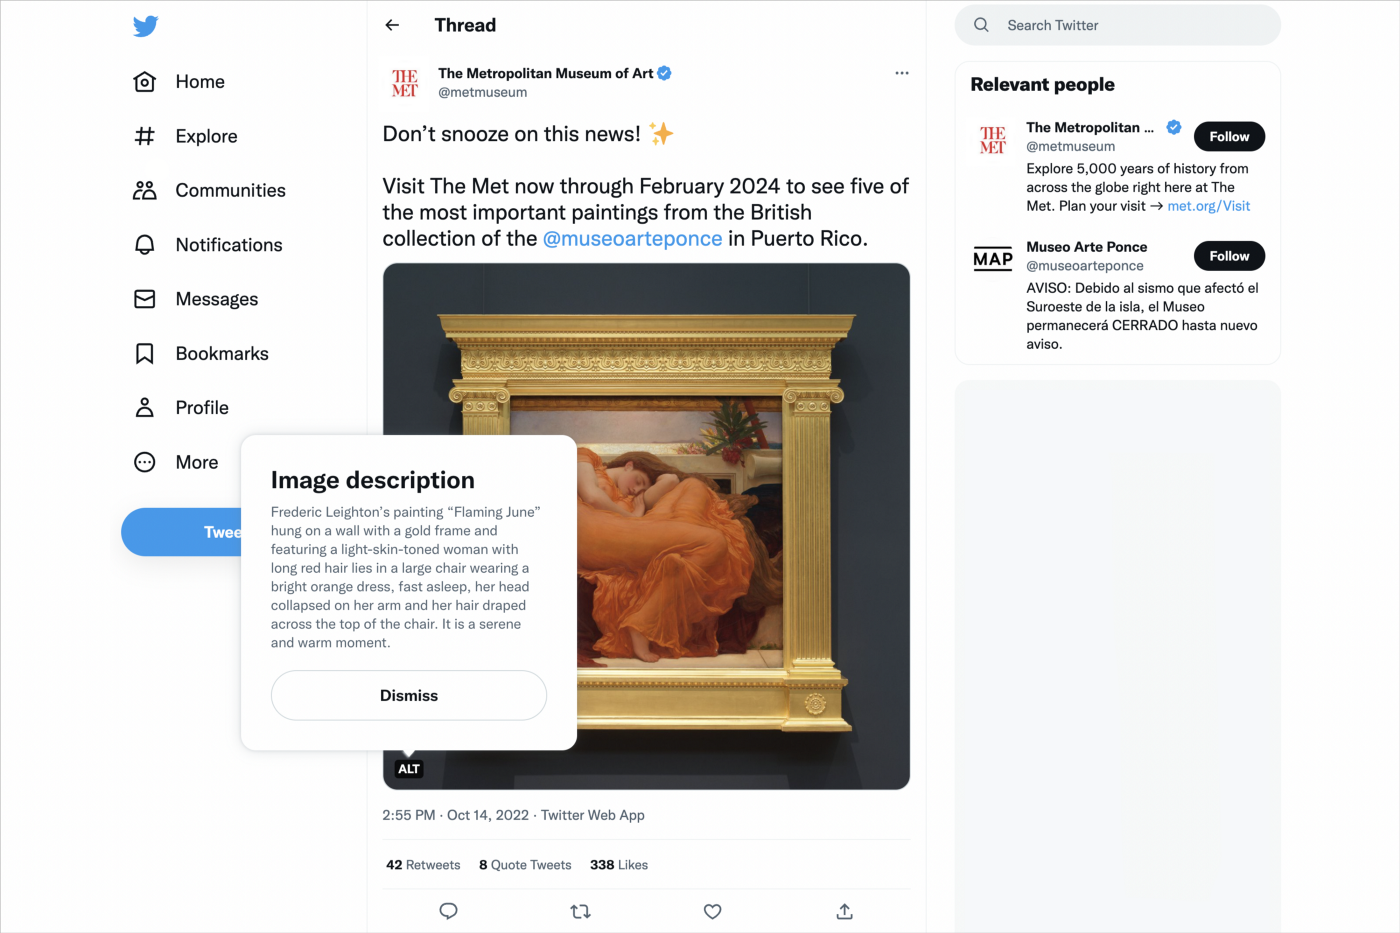 The Metropolitan Museum’s tweet with Frederic Leighton’s portrait painting and a detailed character appearance description.